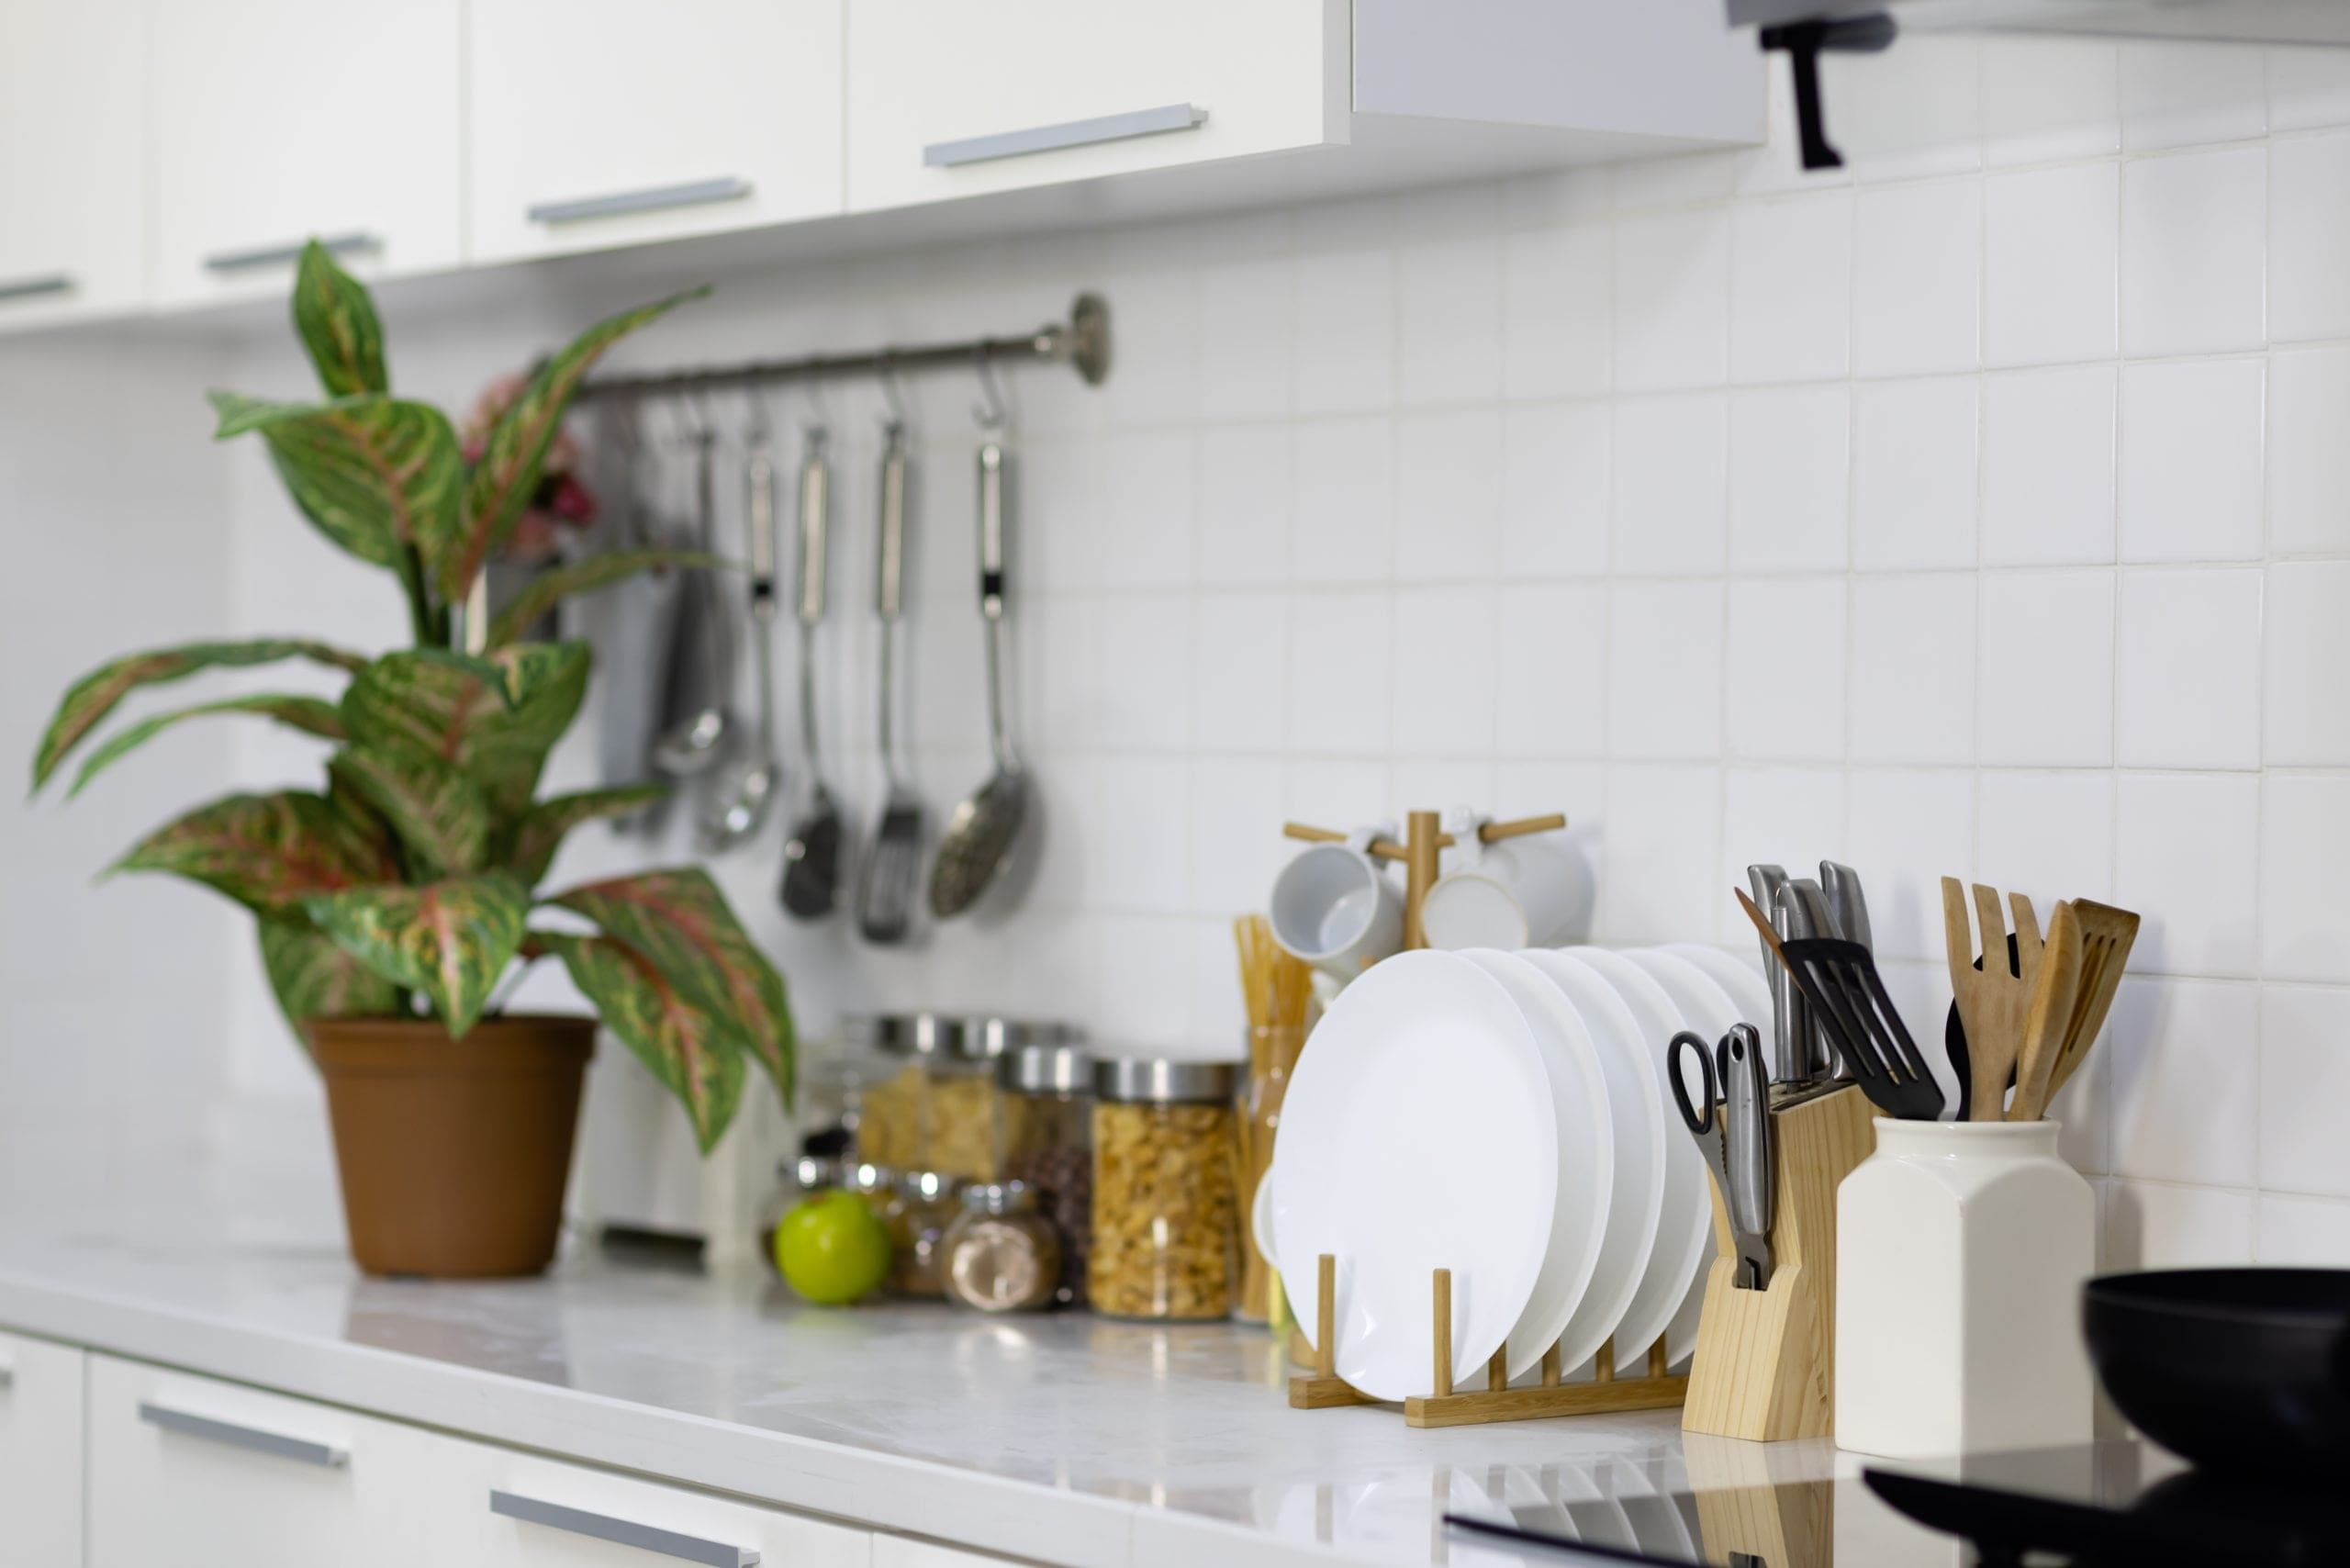 modern kitchen counter with must have kitchen items for your new home and decorative plant